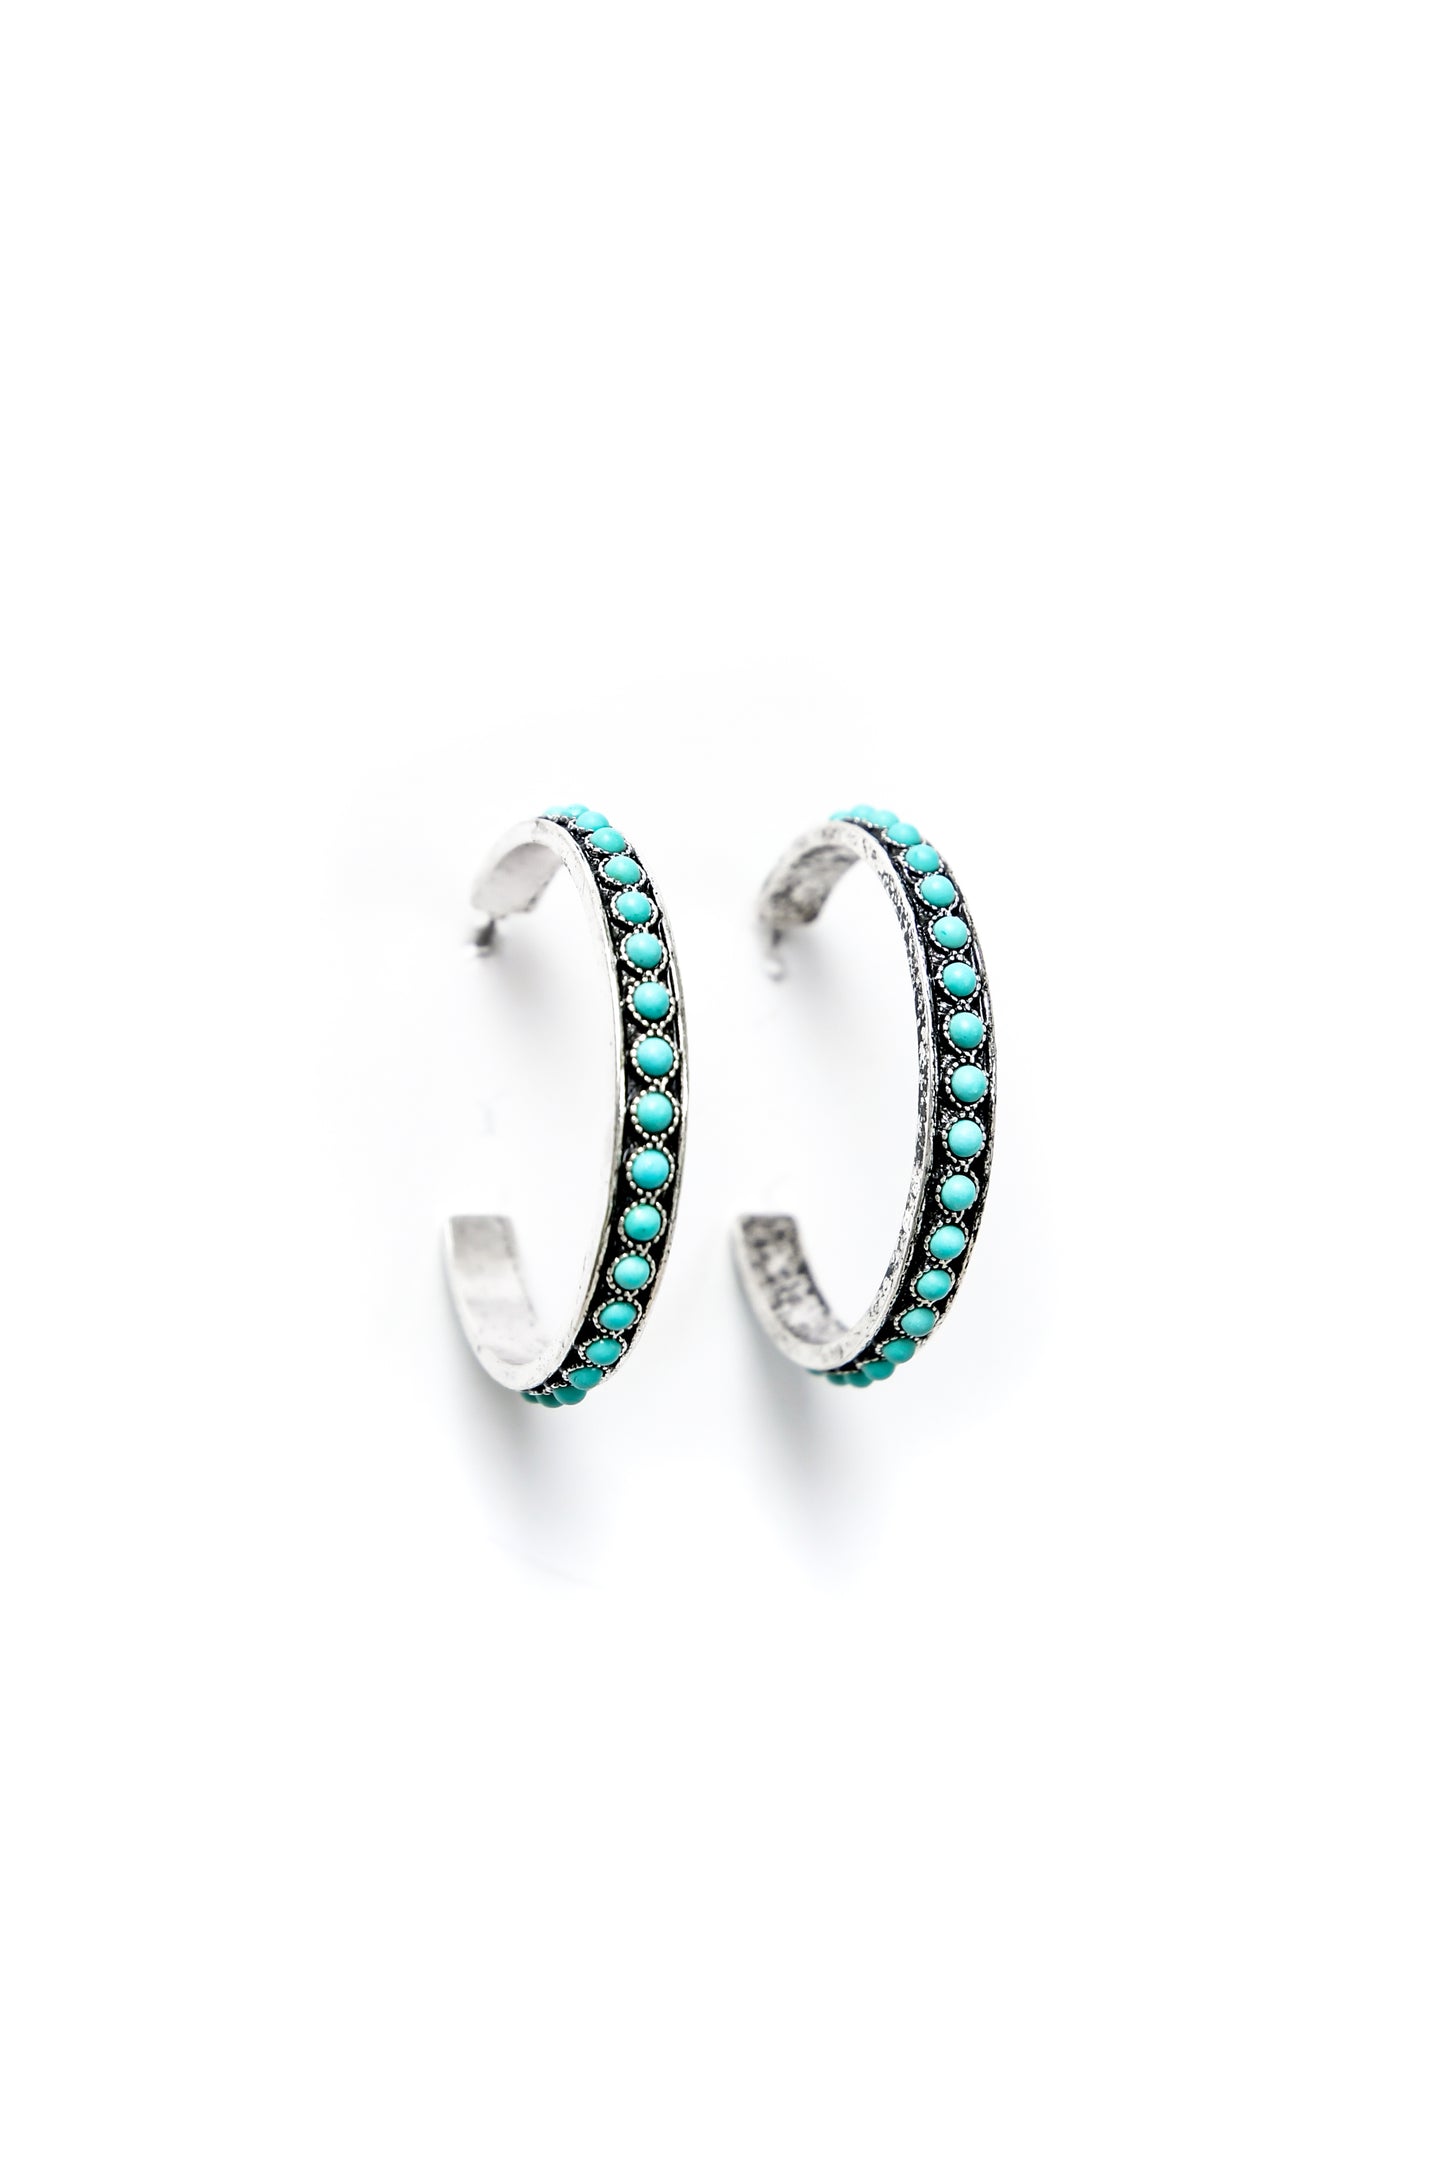 West and Co. Burnished Silver and Turquoise Hoop Earring-Hoop Earrings-West and Co.--The Twisted Chandelier